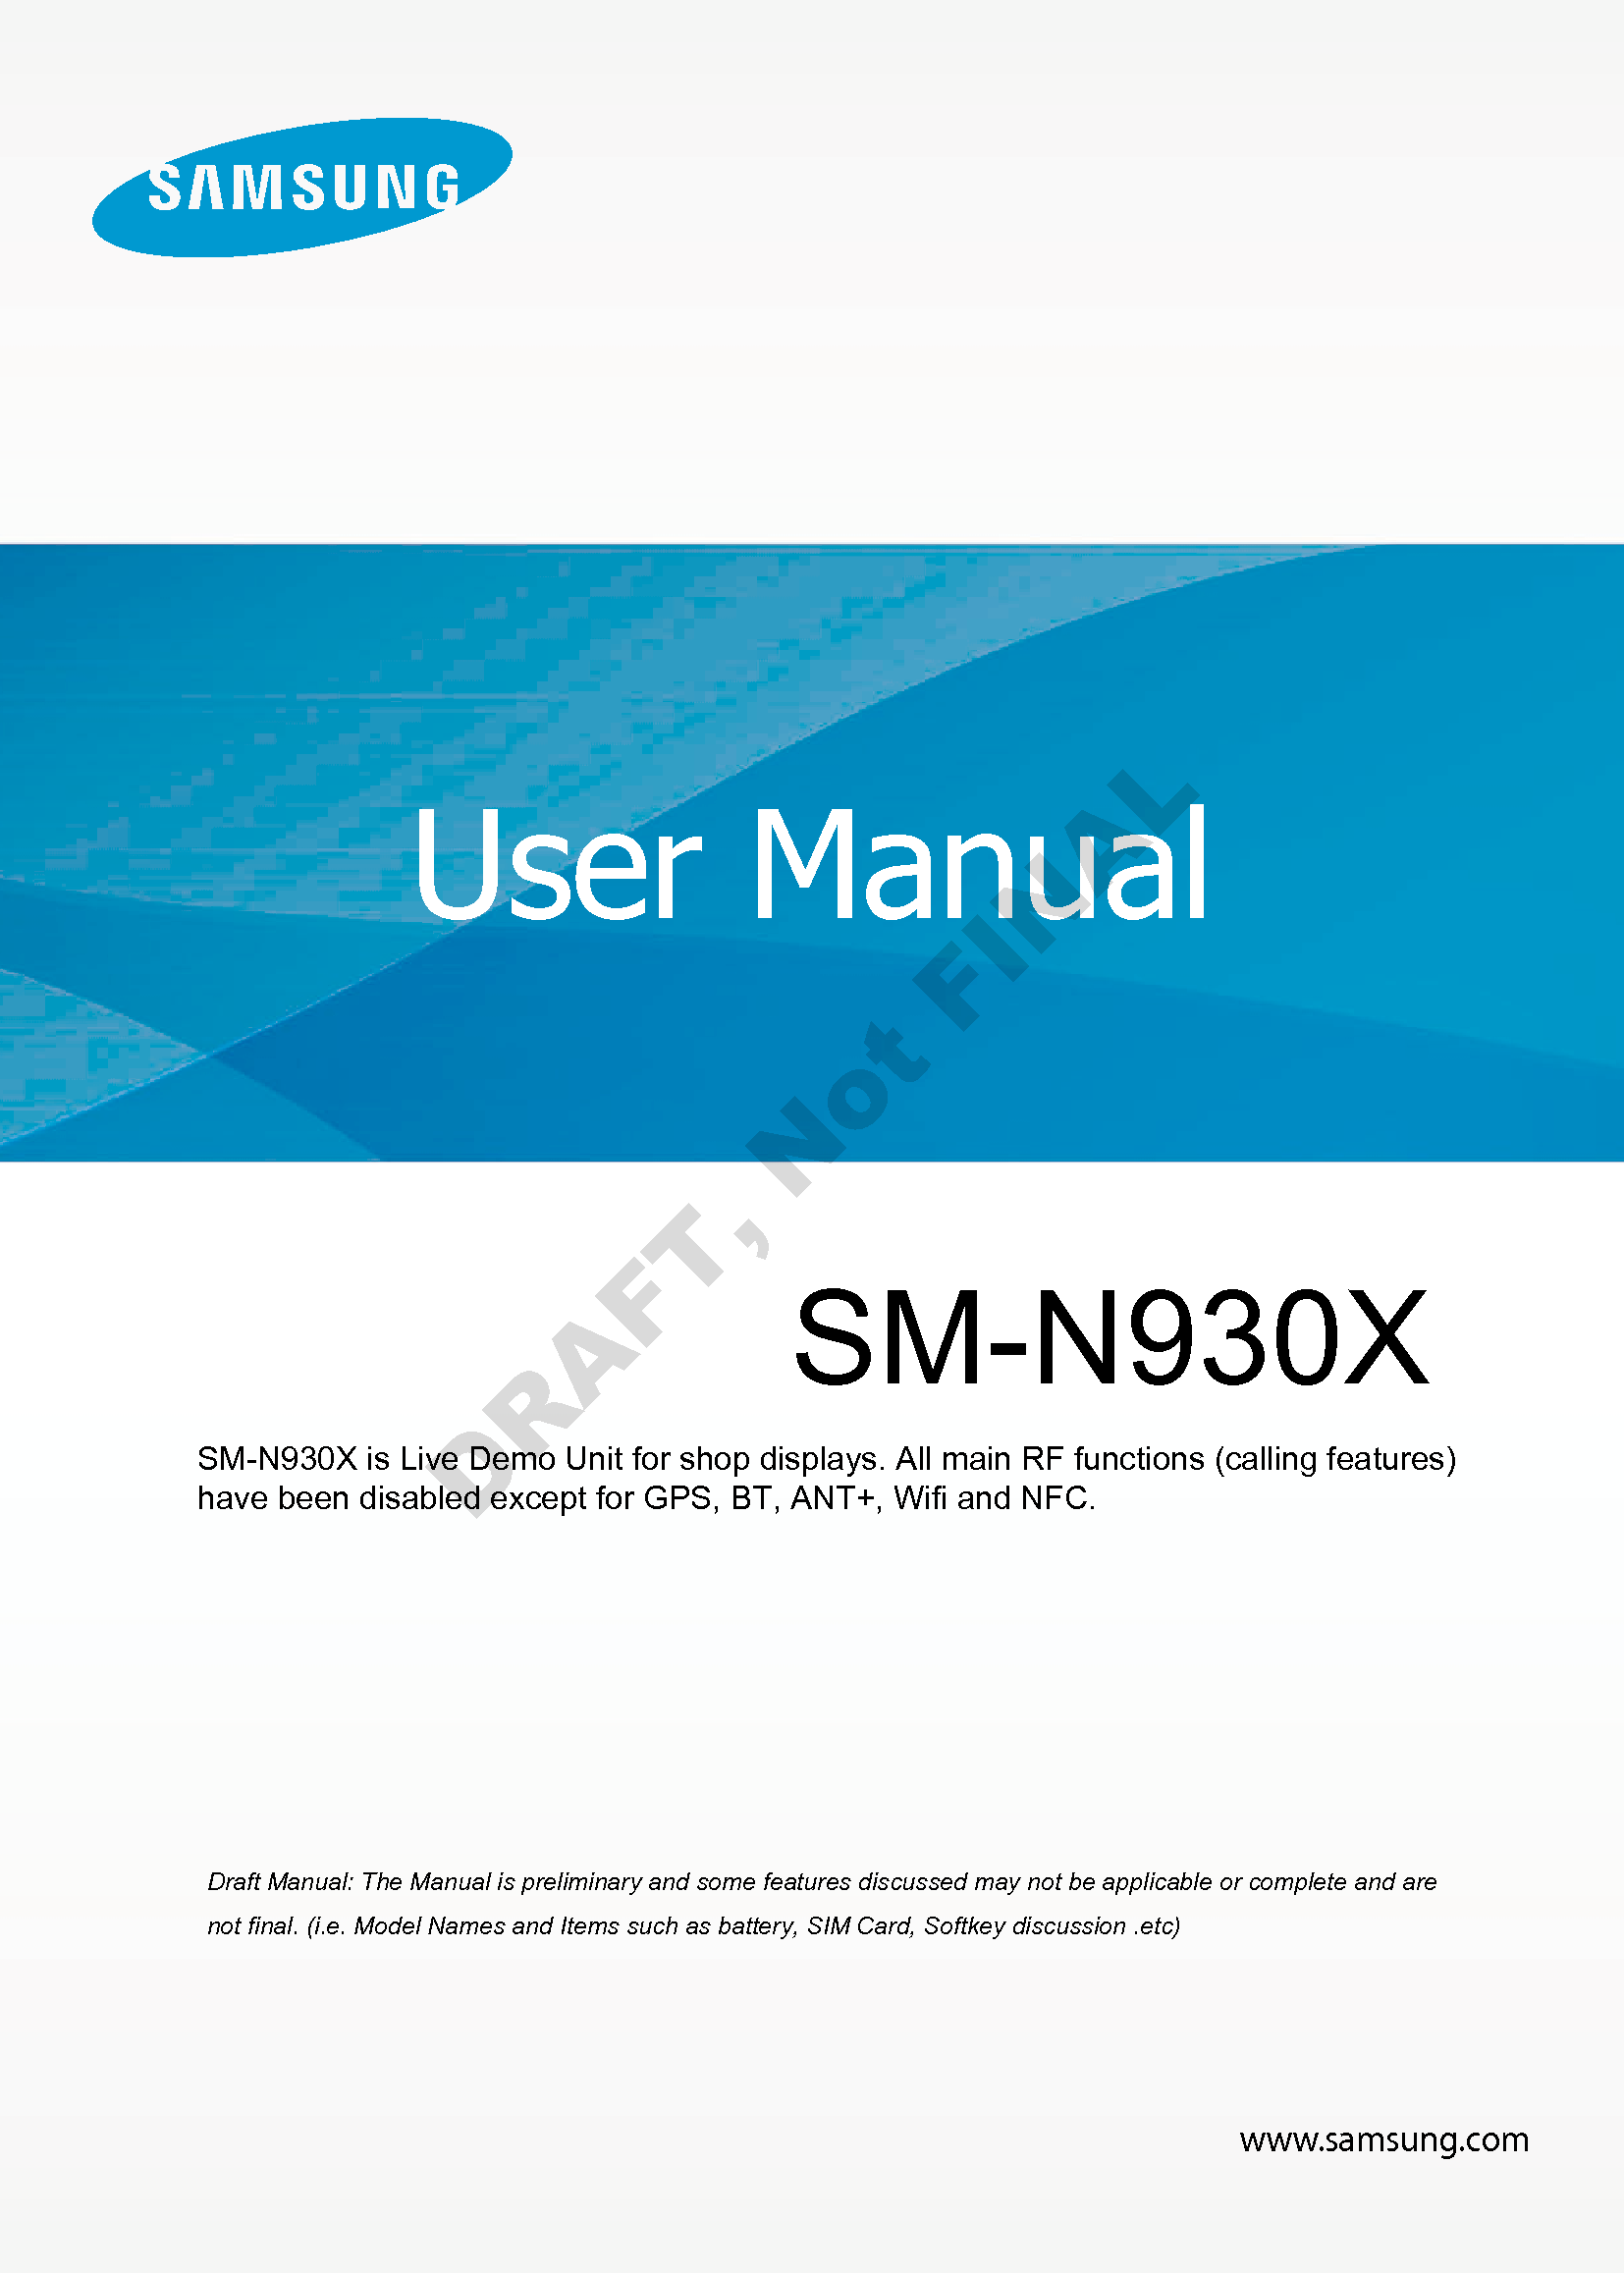 www.samsung.comUser Manuala ana  ana  na and  a dd a n  aa   and a n na  d a and   a a  ad  dn SM-N930X is Live Demo Unit for shop displays. All main RF functions (calling features) have been disabled except for GPS, BT, ANT+, Wifi and NFC.DRAFT, Not FINALSM-N930X 